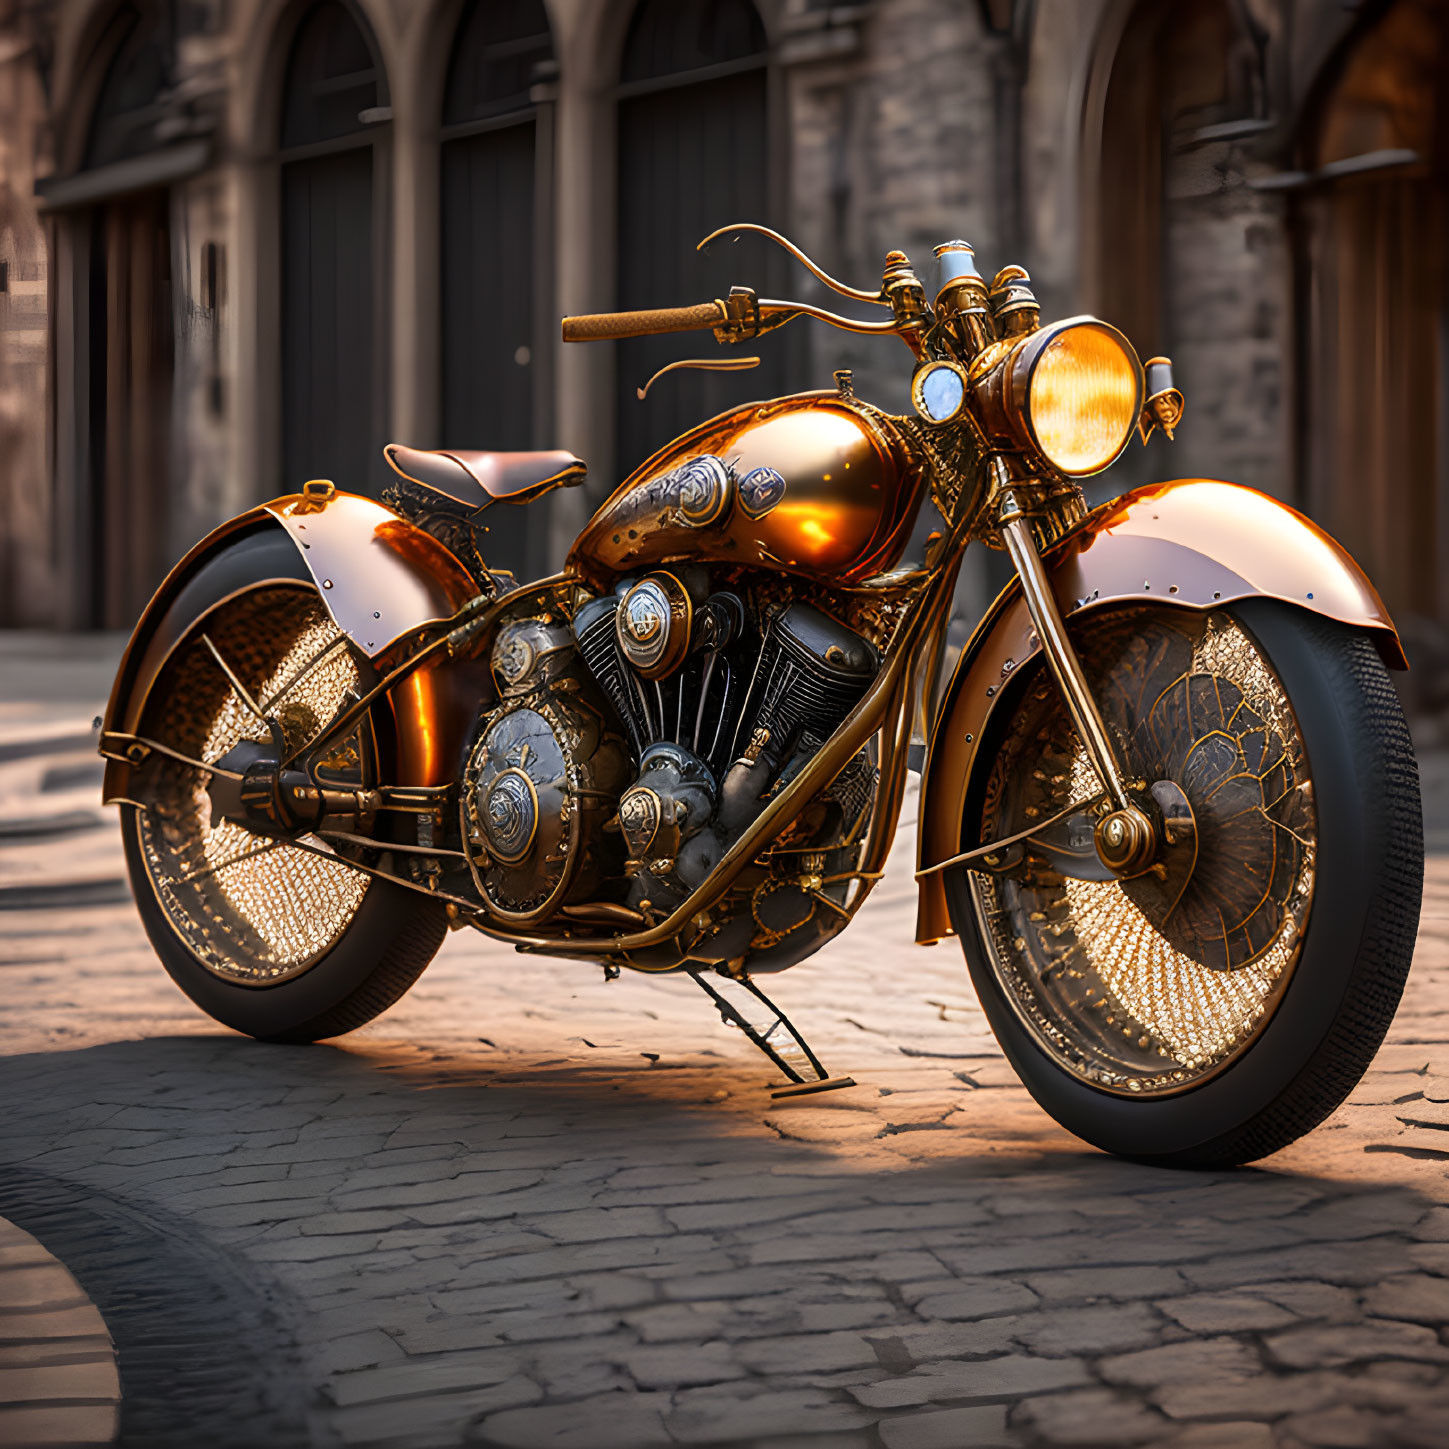 Steampunk motorcycle with brass, copper, iron and 